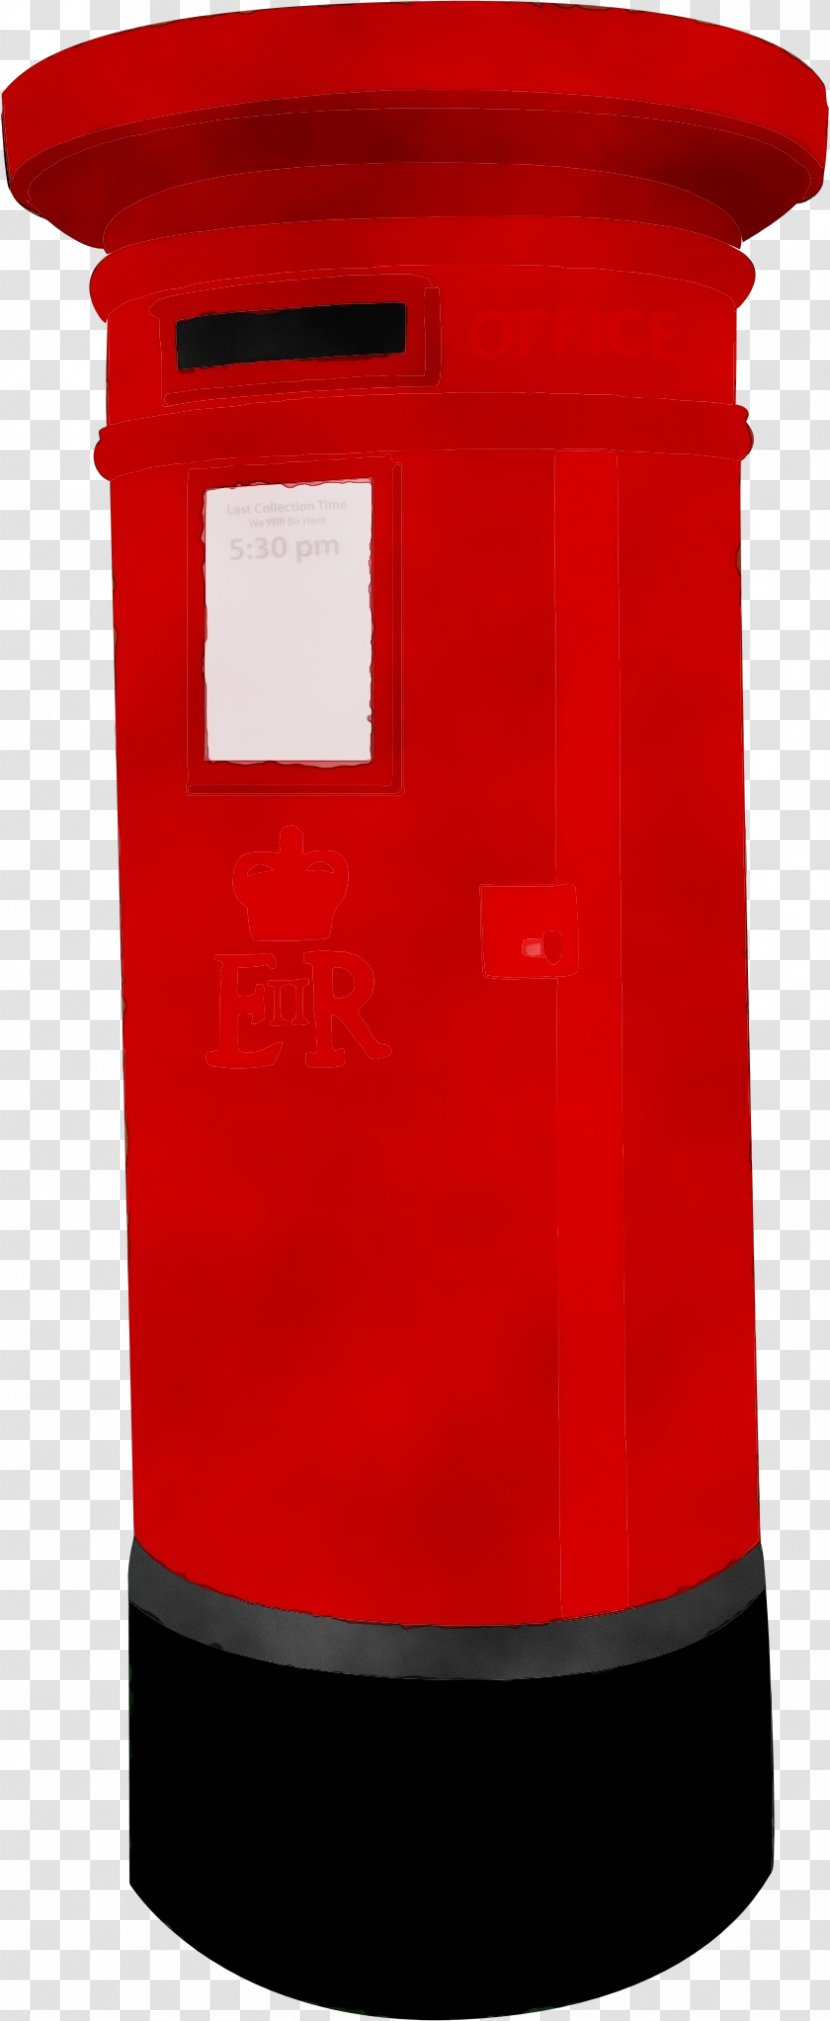 Red Post Box Mailbox Cylinder Transparent PNG